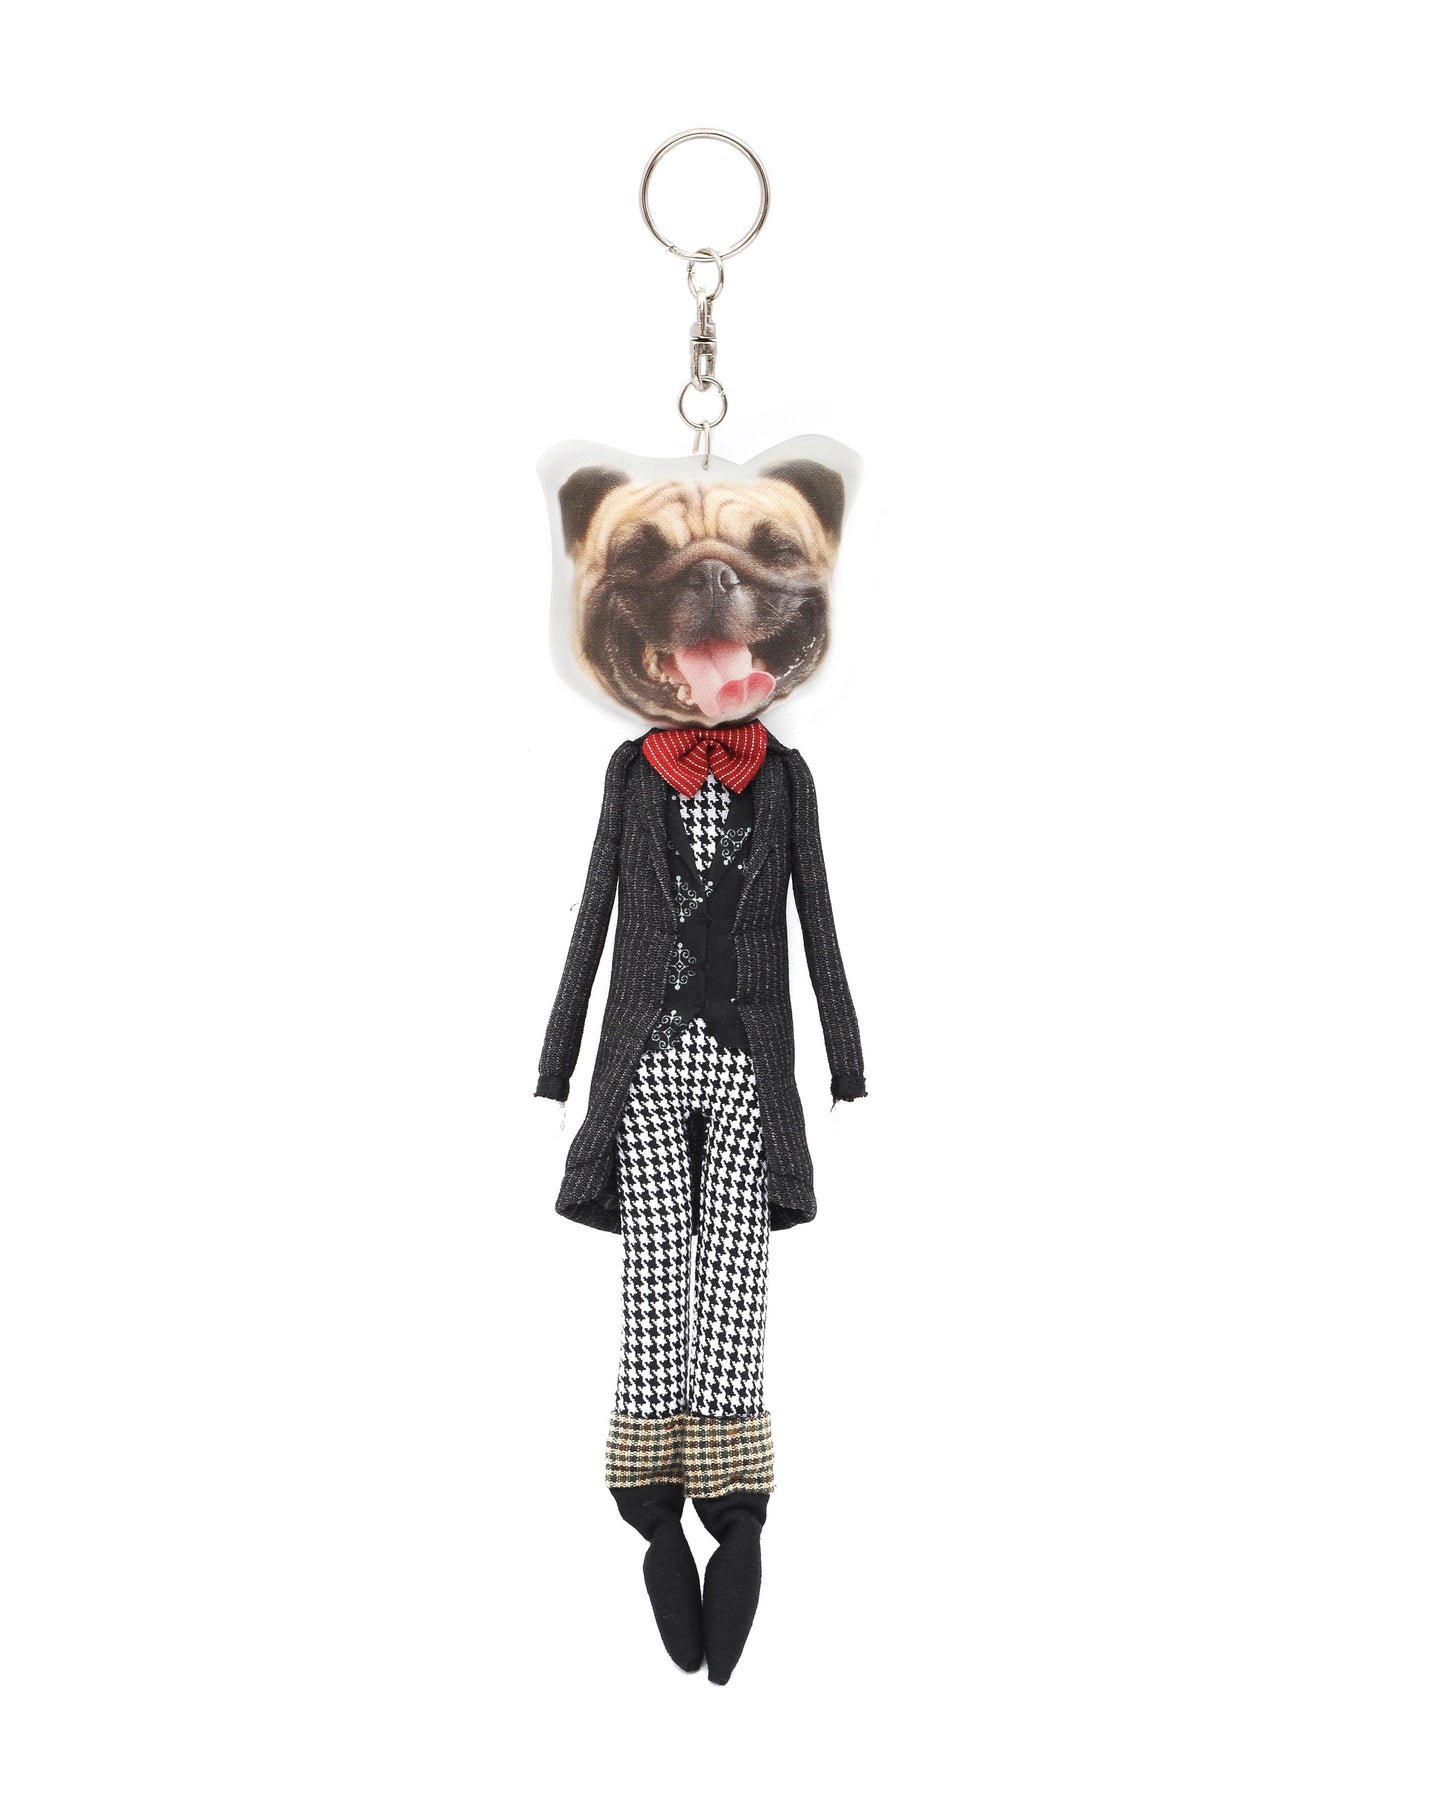 New-Style Fashionable Cute Animal Keychains